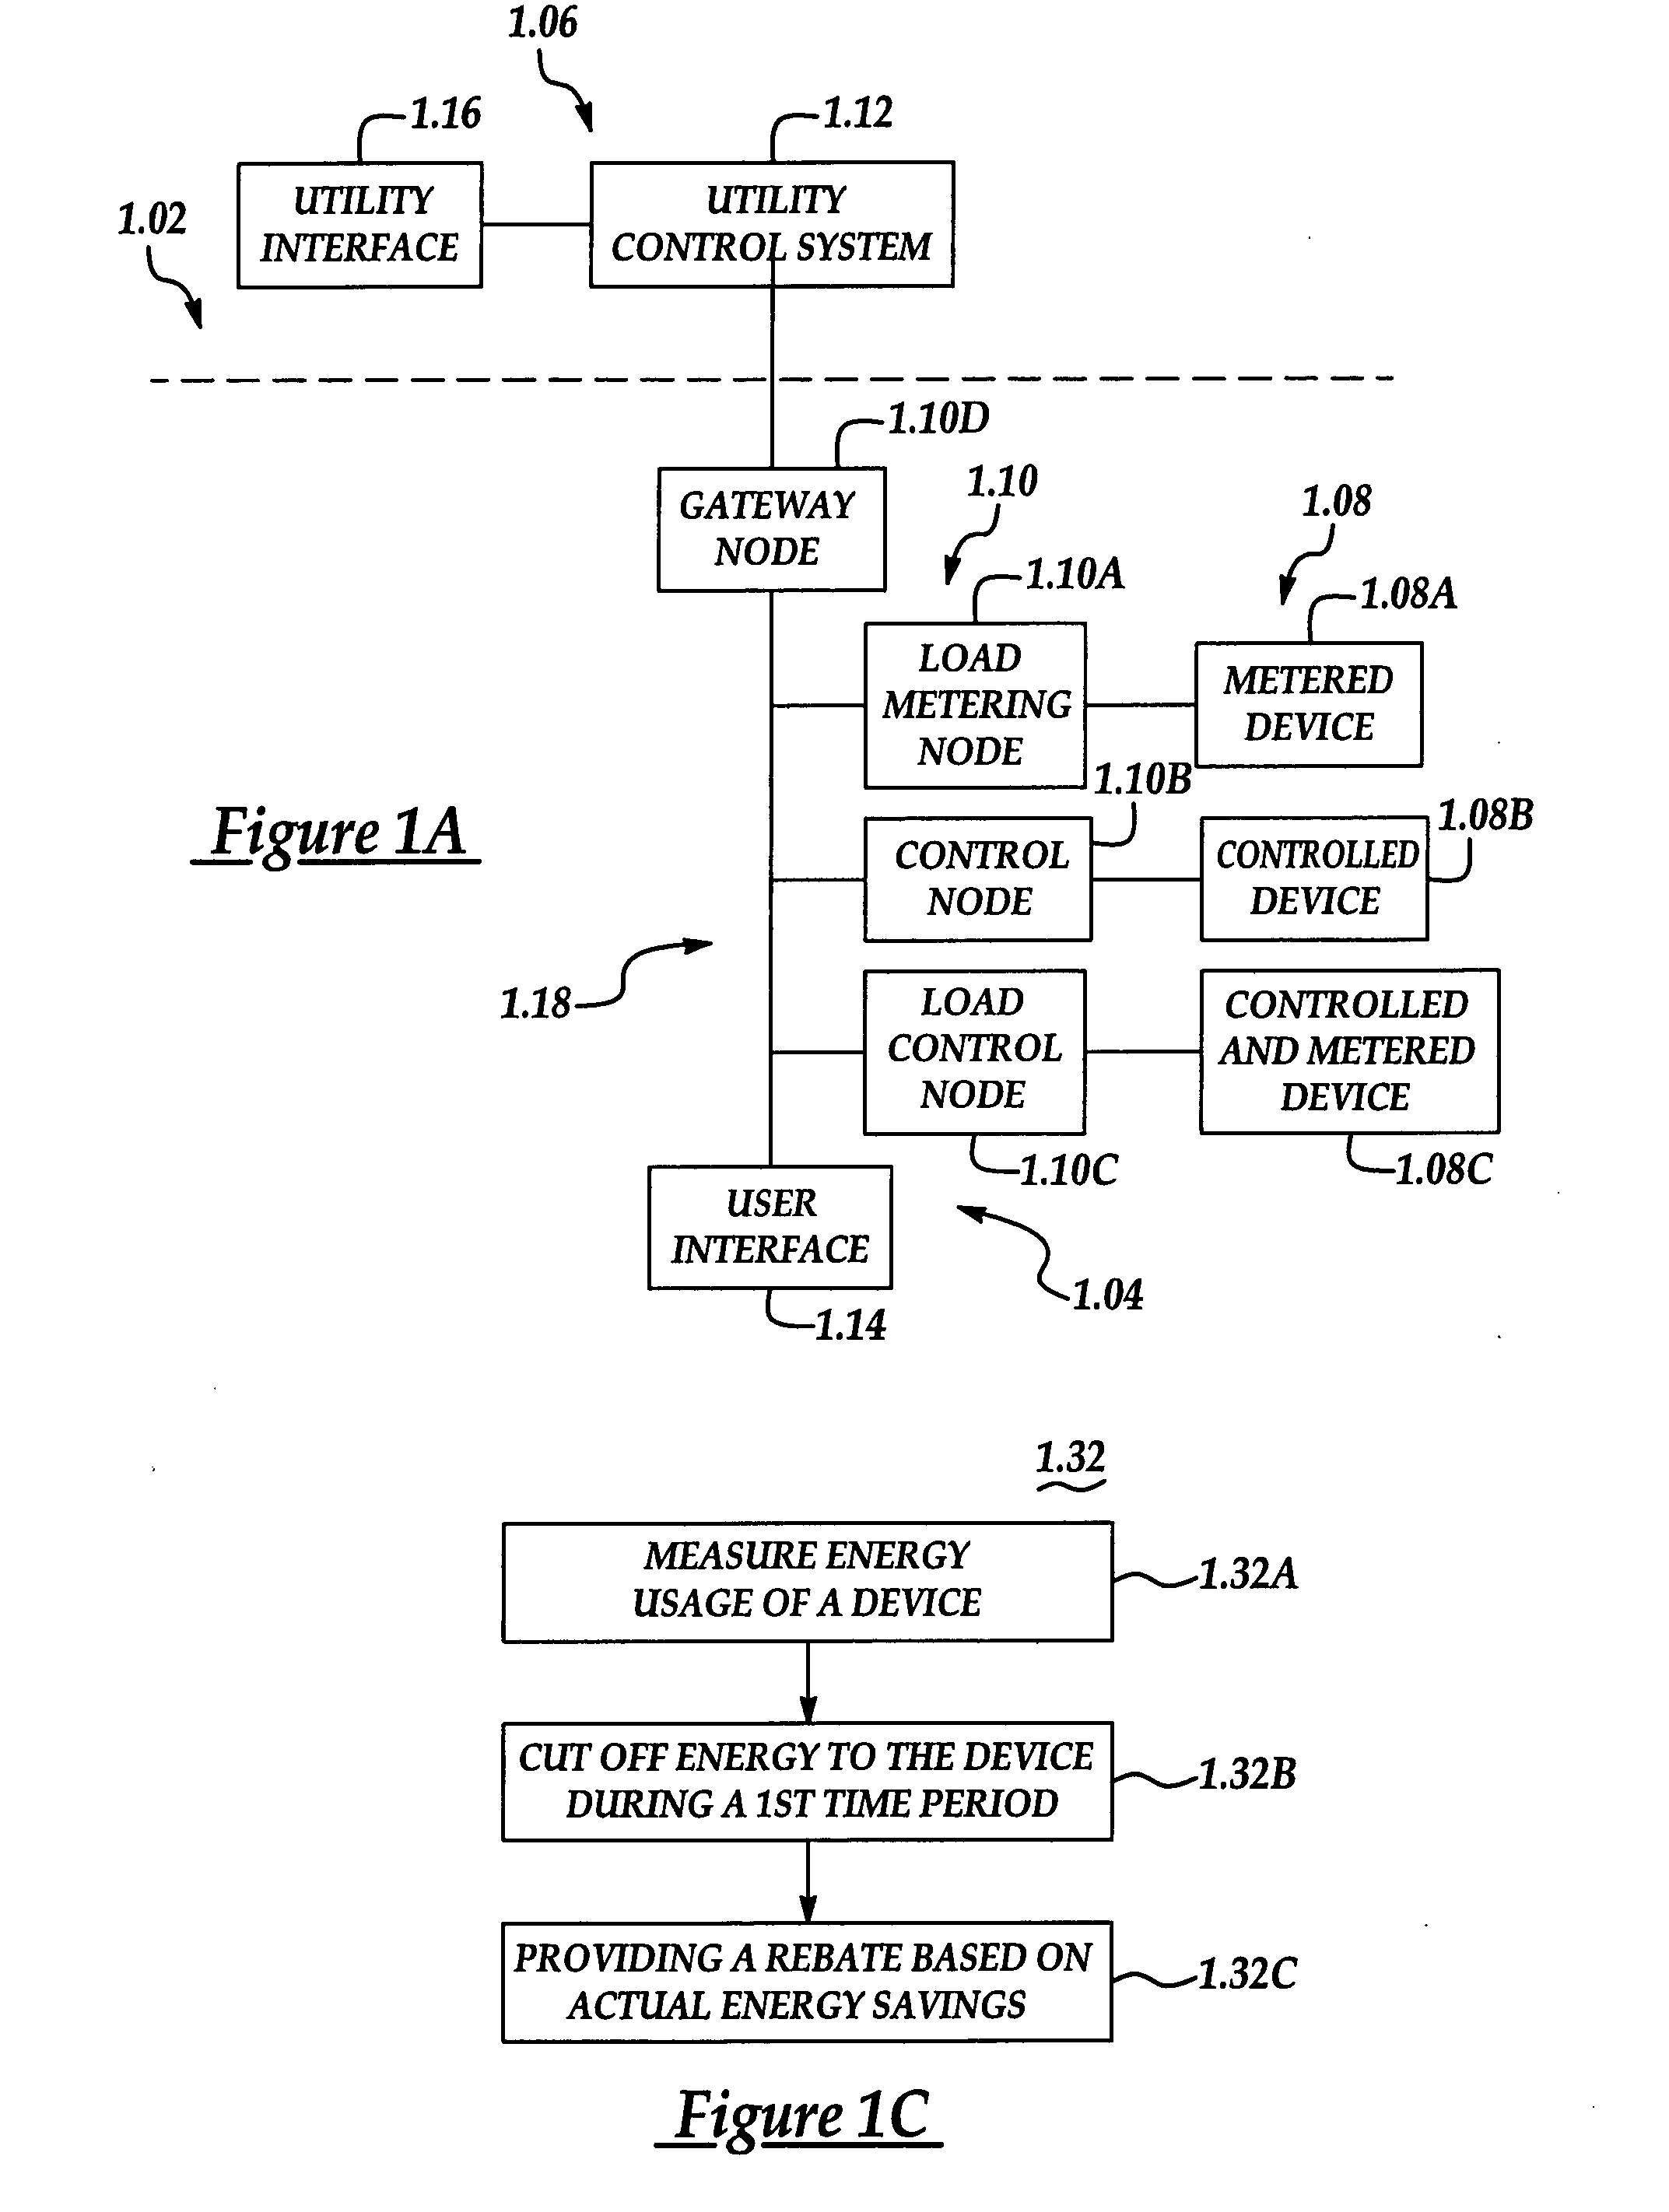 Configurable architecture for controlling delivery and/or usage of a commodity